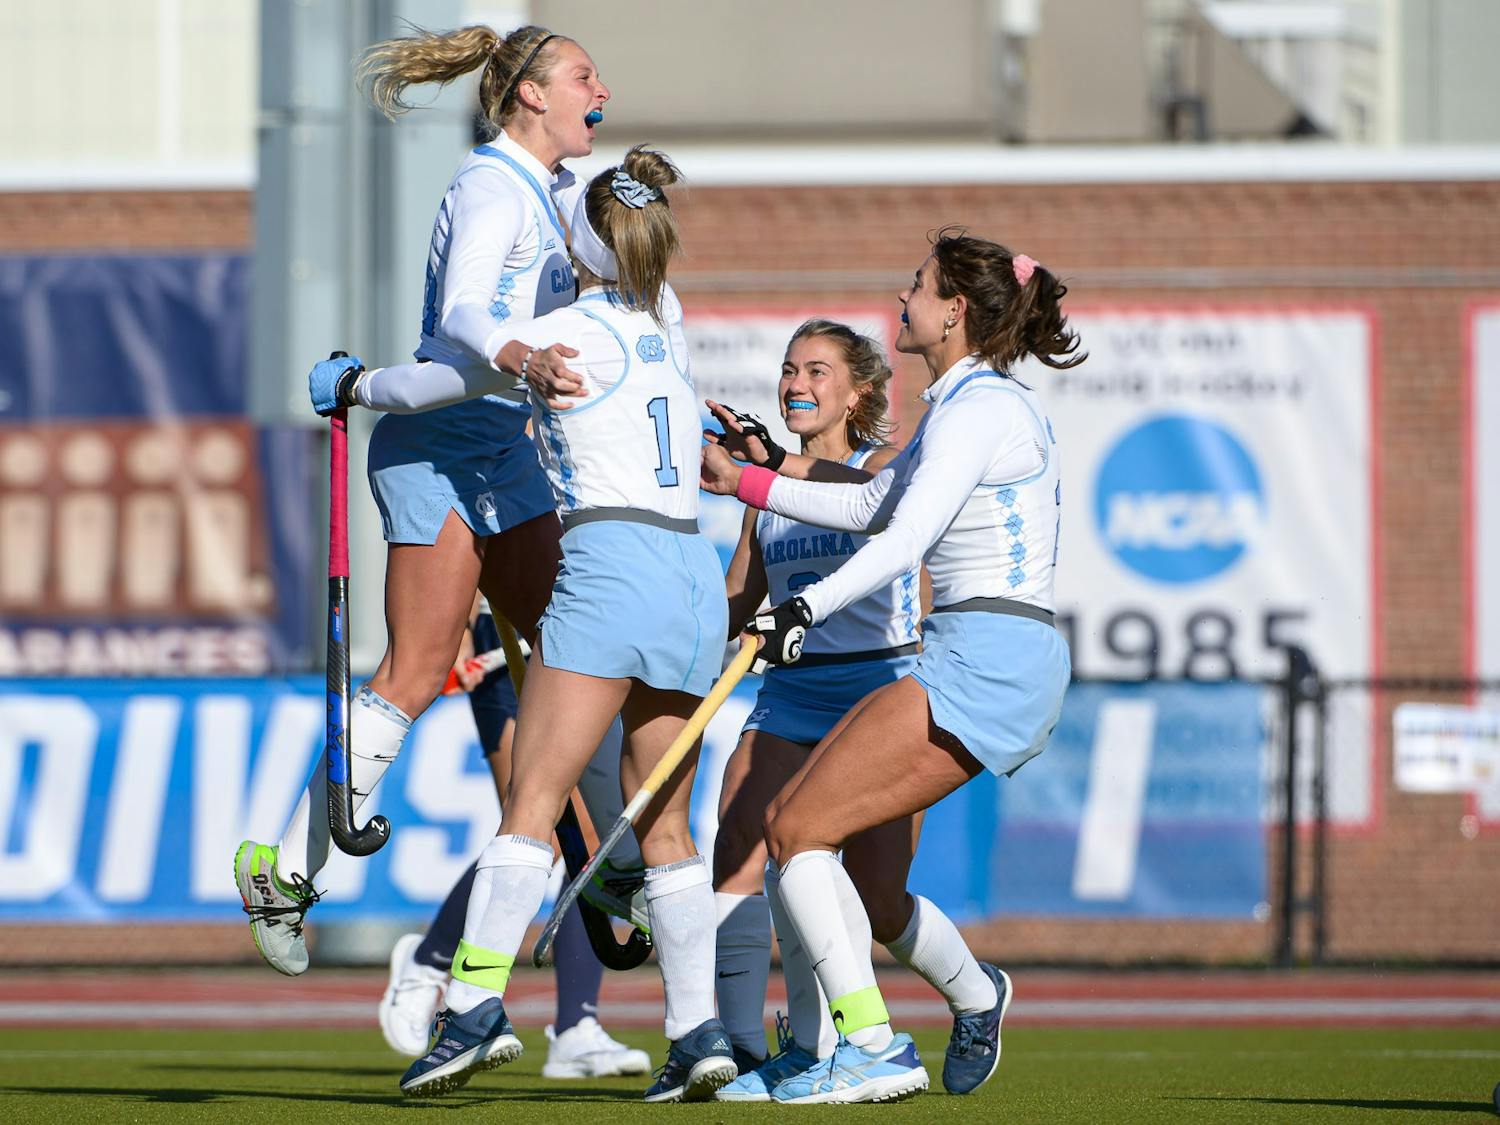 UNC senior Forward Paityn Wirth (10) celebrates a goal during the Field Hockey game against Penn State on Friday, Nov. 18, 2022 at the George J. Sherman Sports Complex in Storrs, Connecticut. UNC won 3-0.